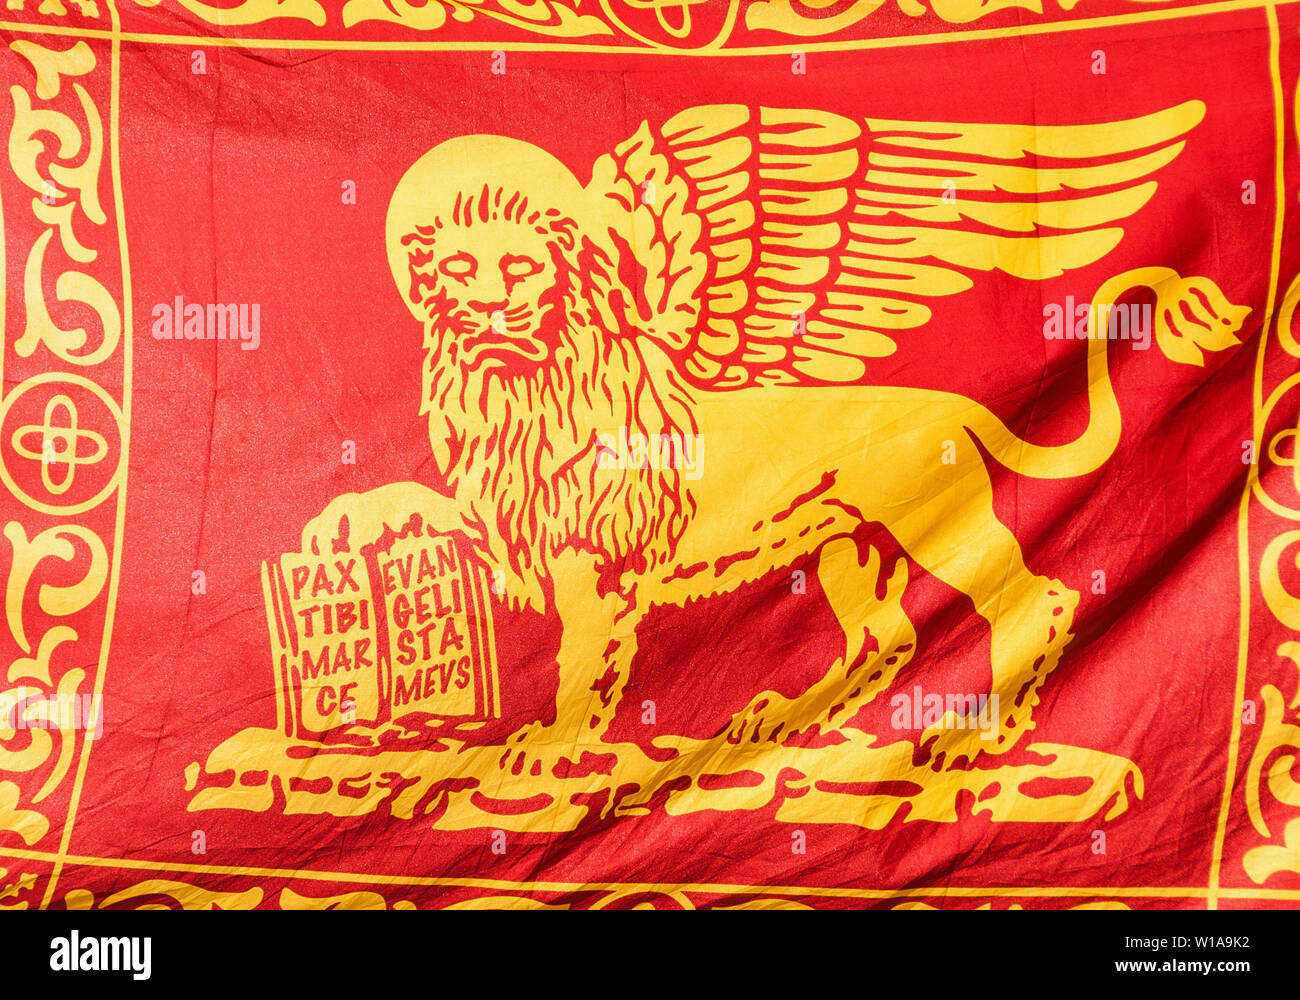 Old Venice Republic Flag with Saint Mark Lion and motto 'Pax tibi Marce, evangelista meus' (Peace be with thee, O Mark, my evangelist) as background Stock Photo